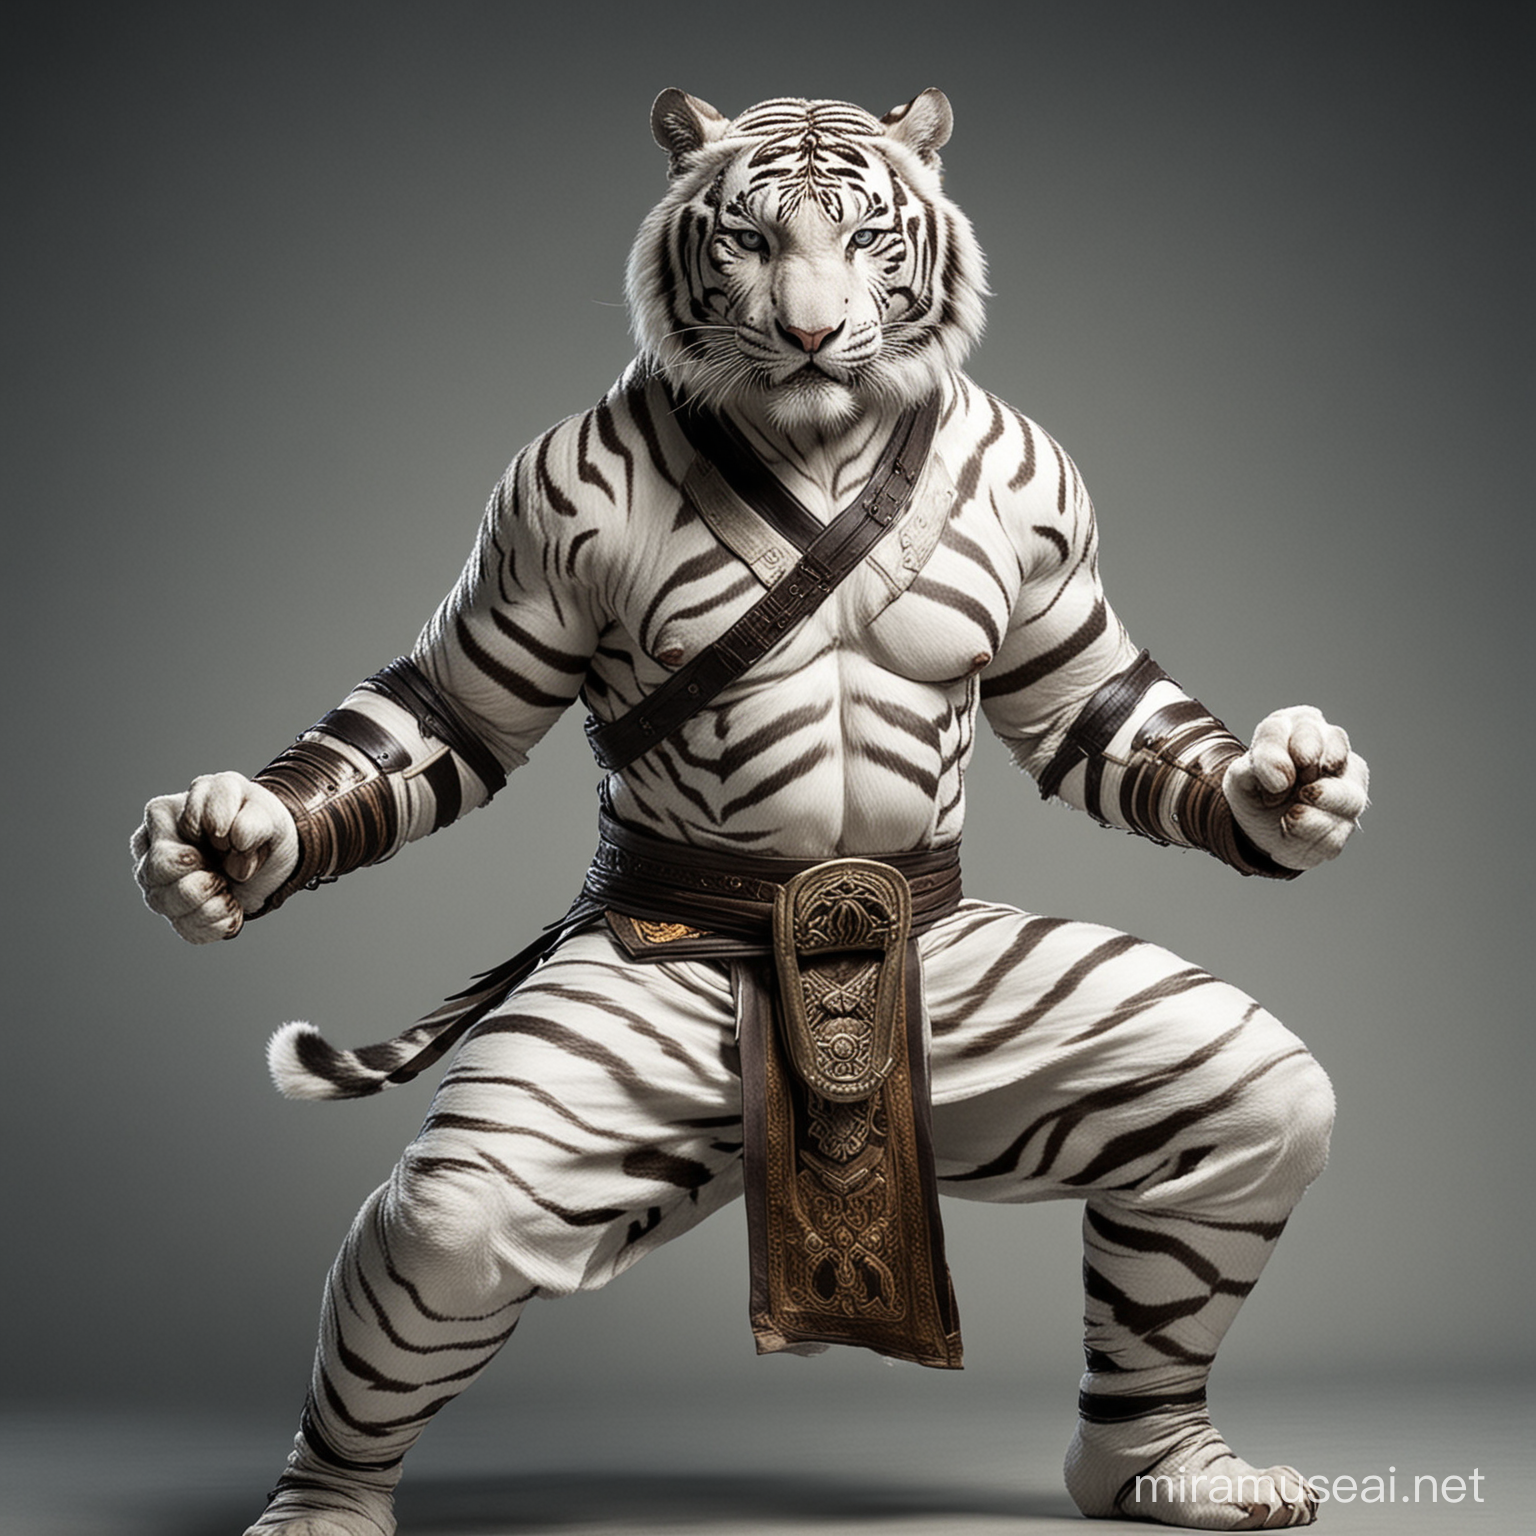 sub human warrior. He is white tiger practicing martial arts and be champion of it. He also is gargantuan human with the strength of all. He is wearing a martial arts attire
